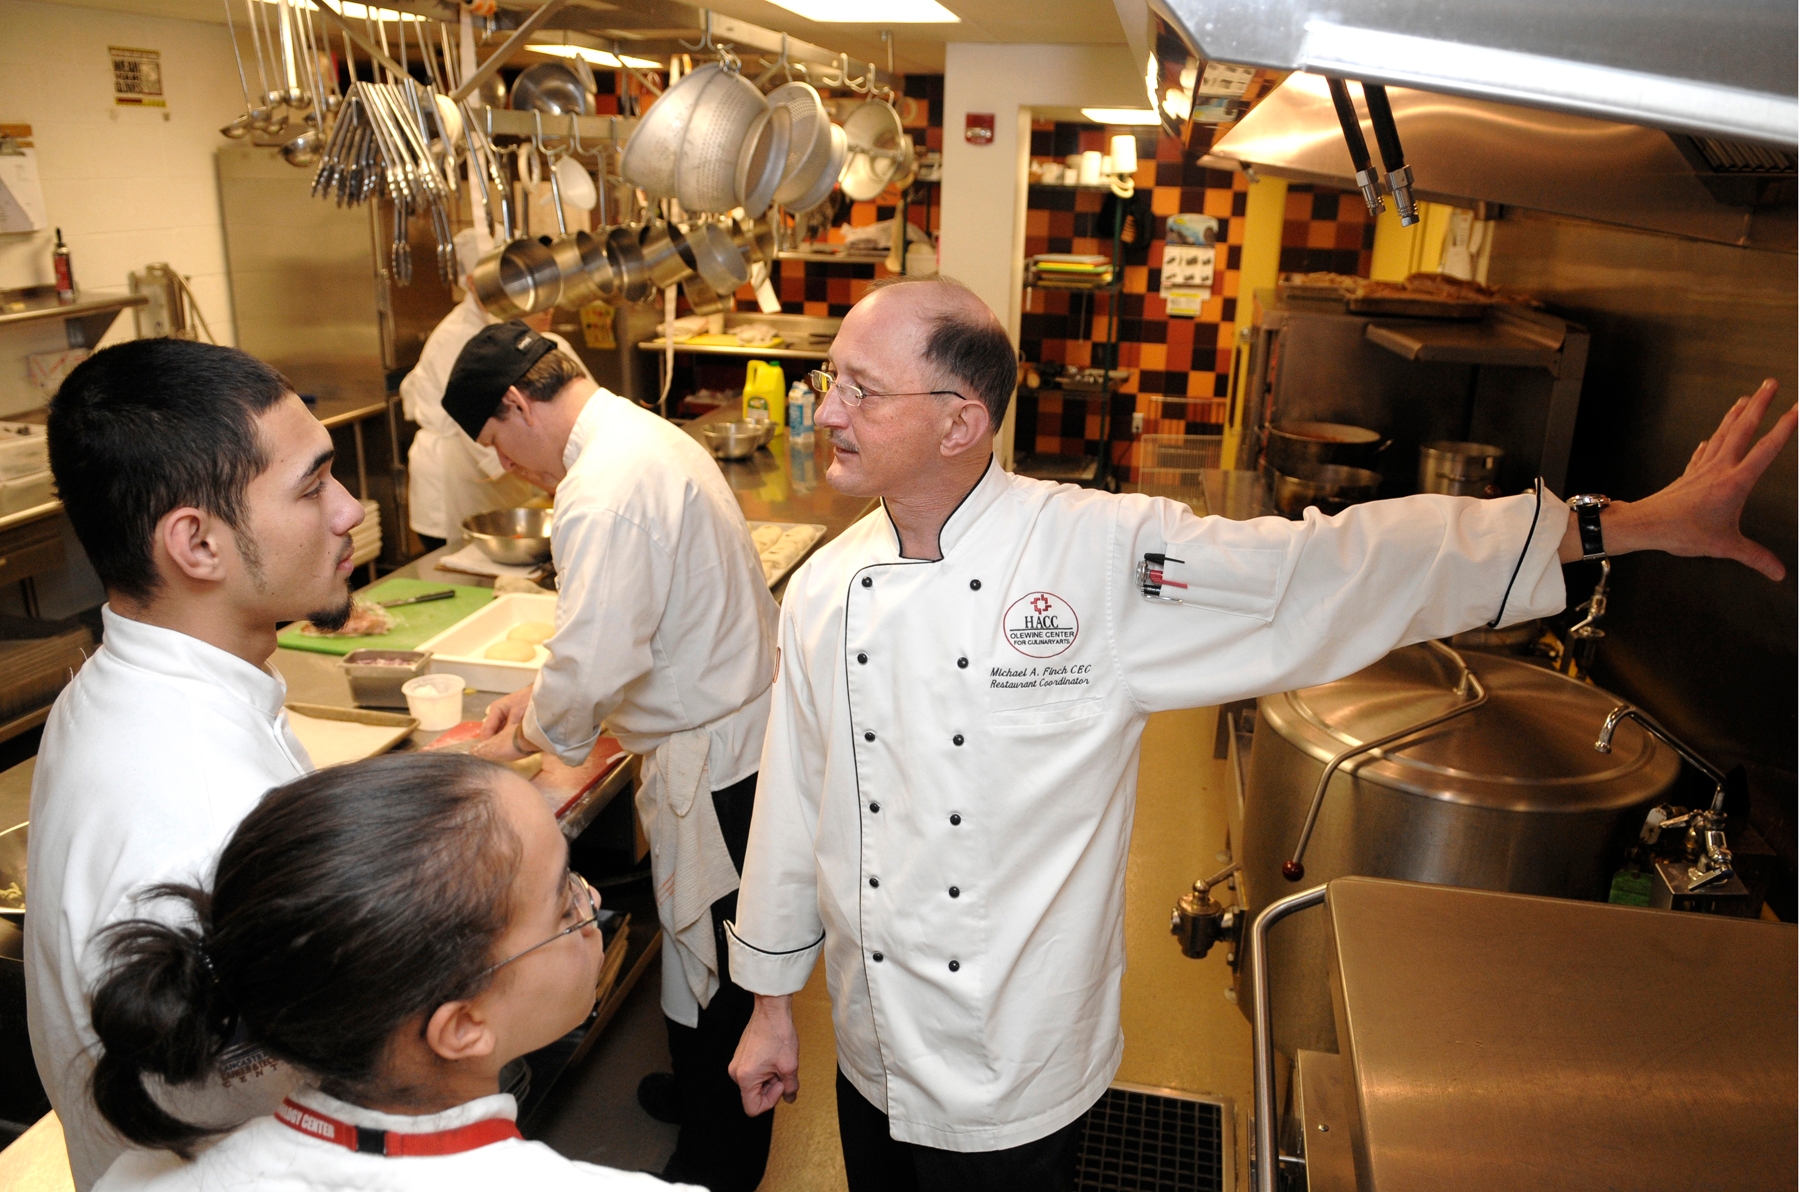 HACC Chef Instructor Michael Finch